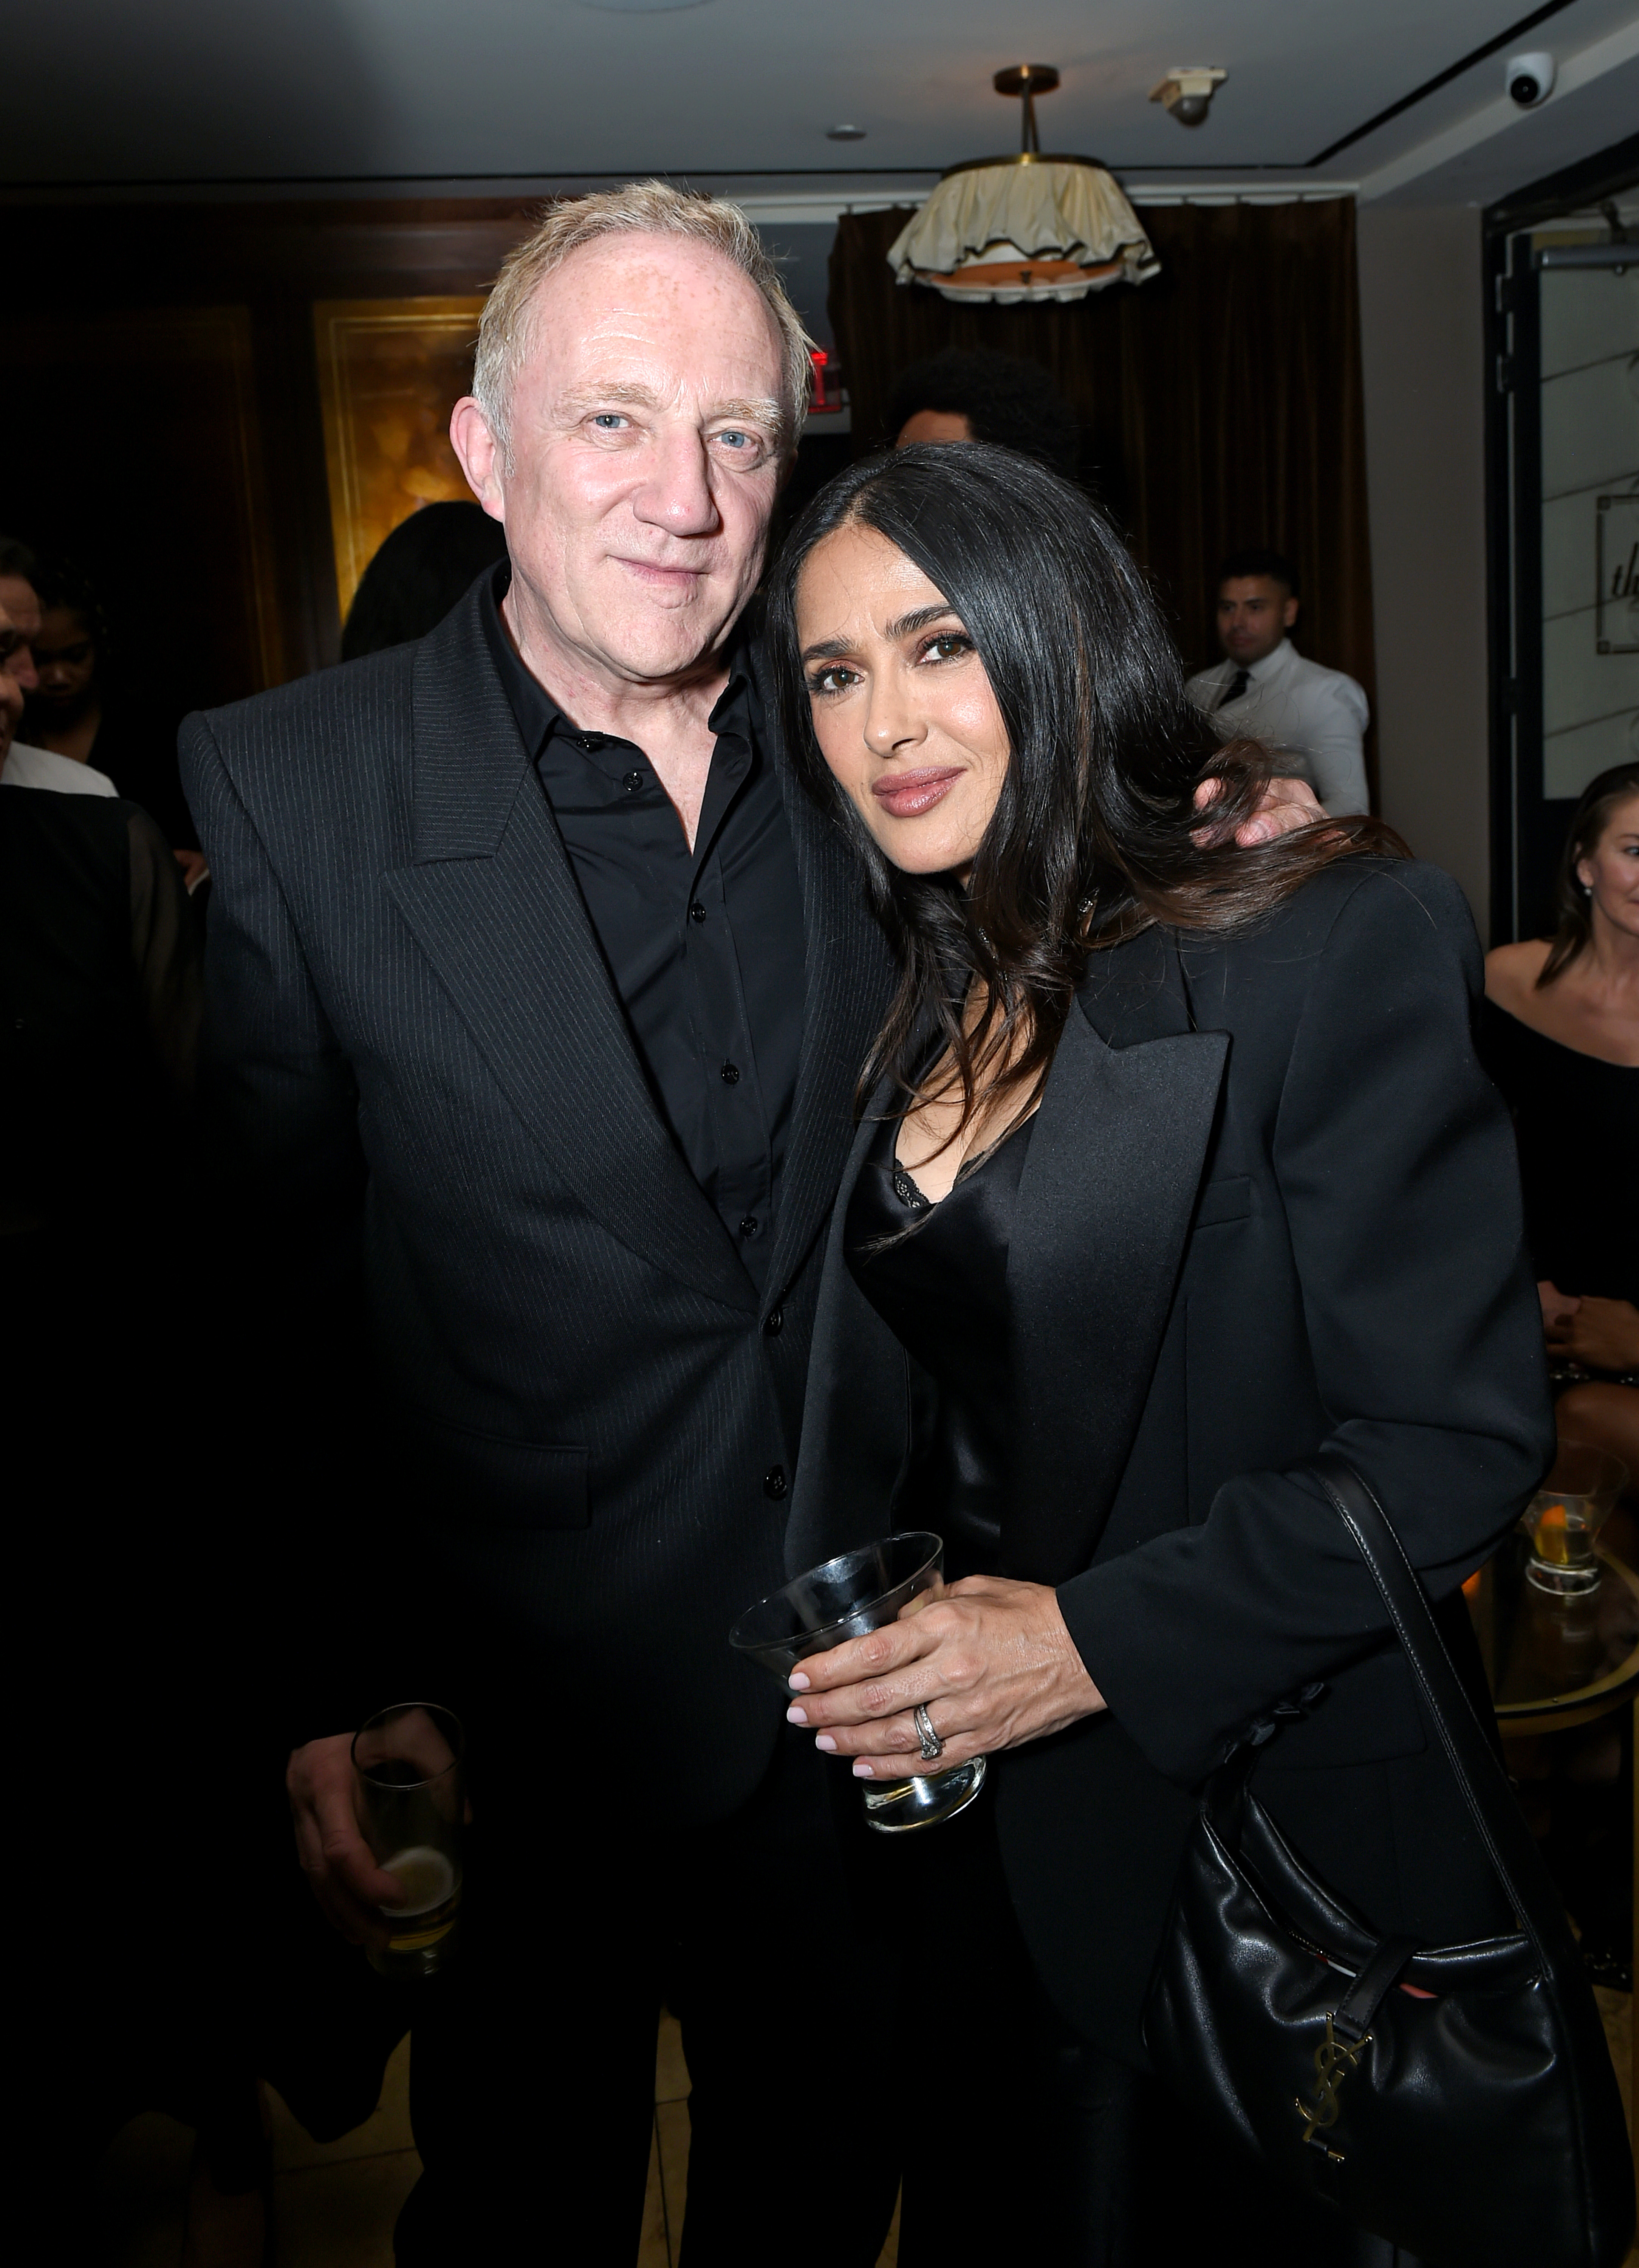 Salma have her 16-year-old daughter Valentina photo cred whom she shares with her husband, François-Henri Pinault